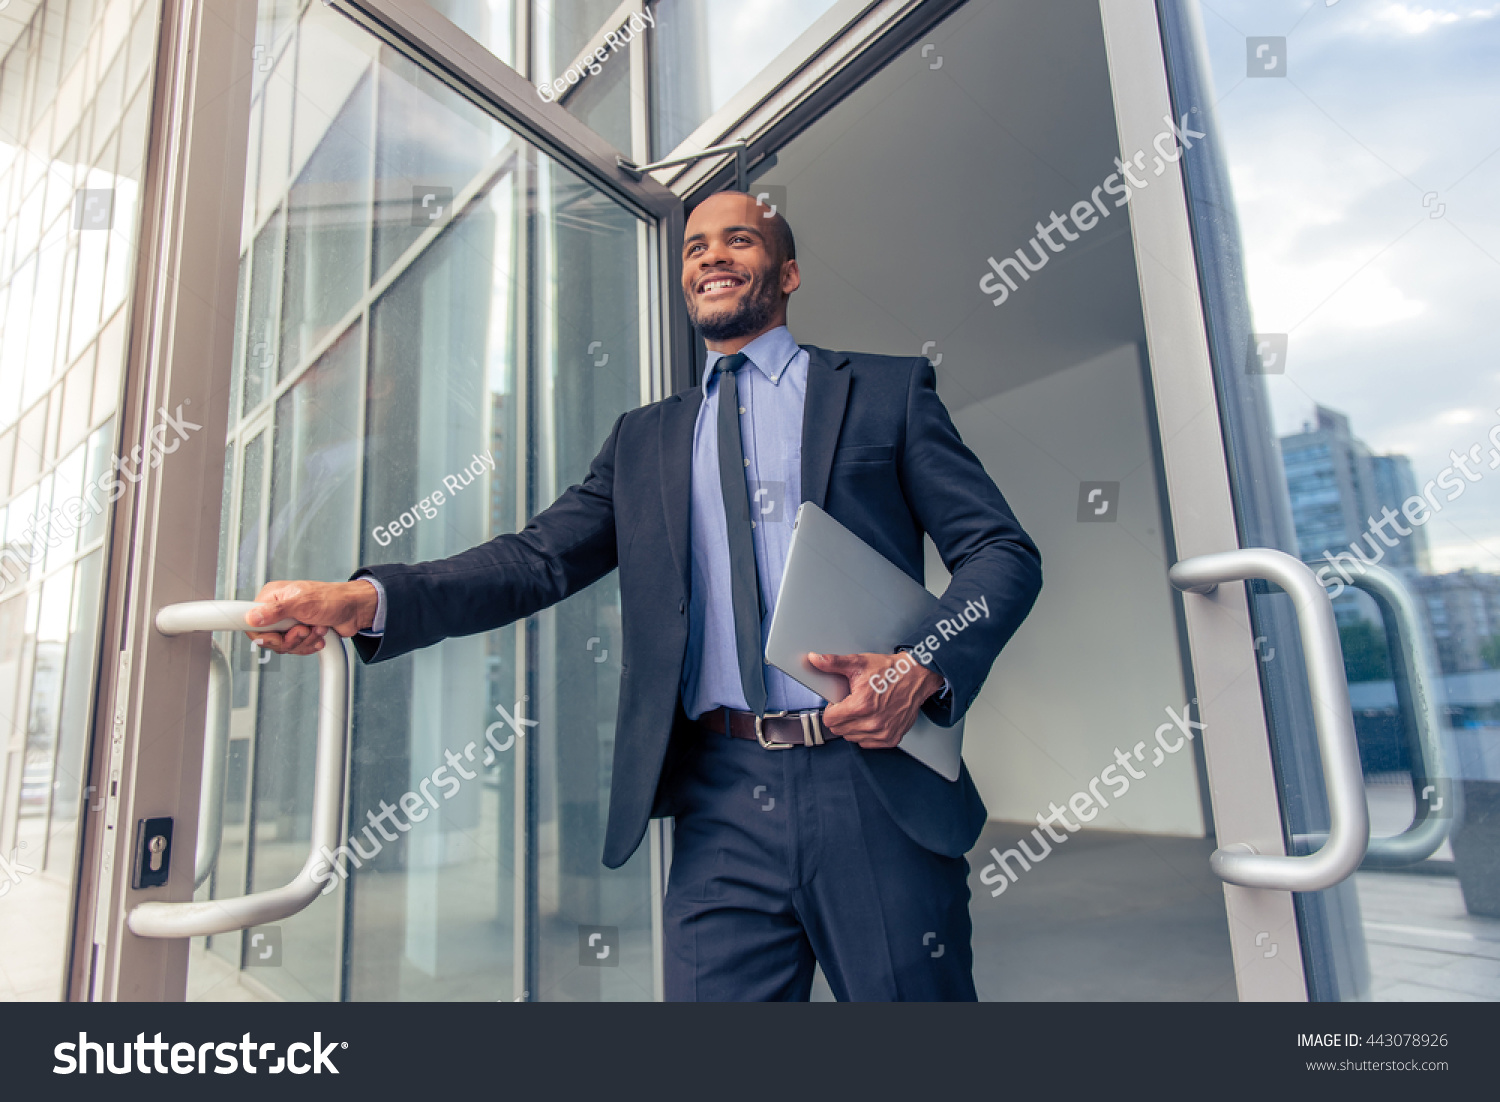 Low angle view of handsome young Afro American businessman in classic suit holding a laptop and smiling while leaving the office building #443078926